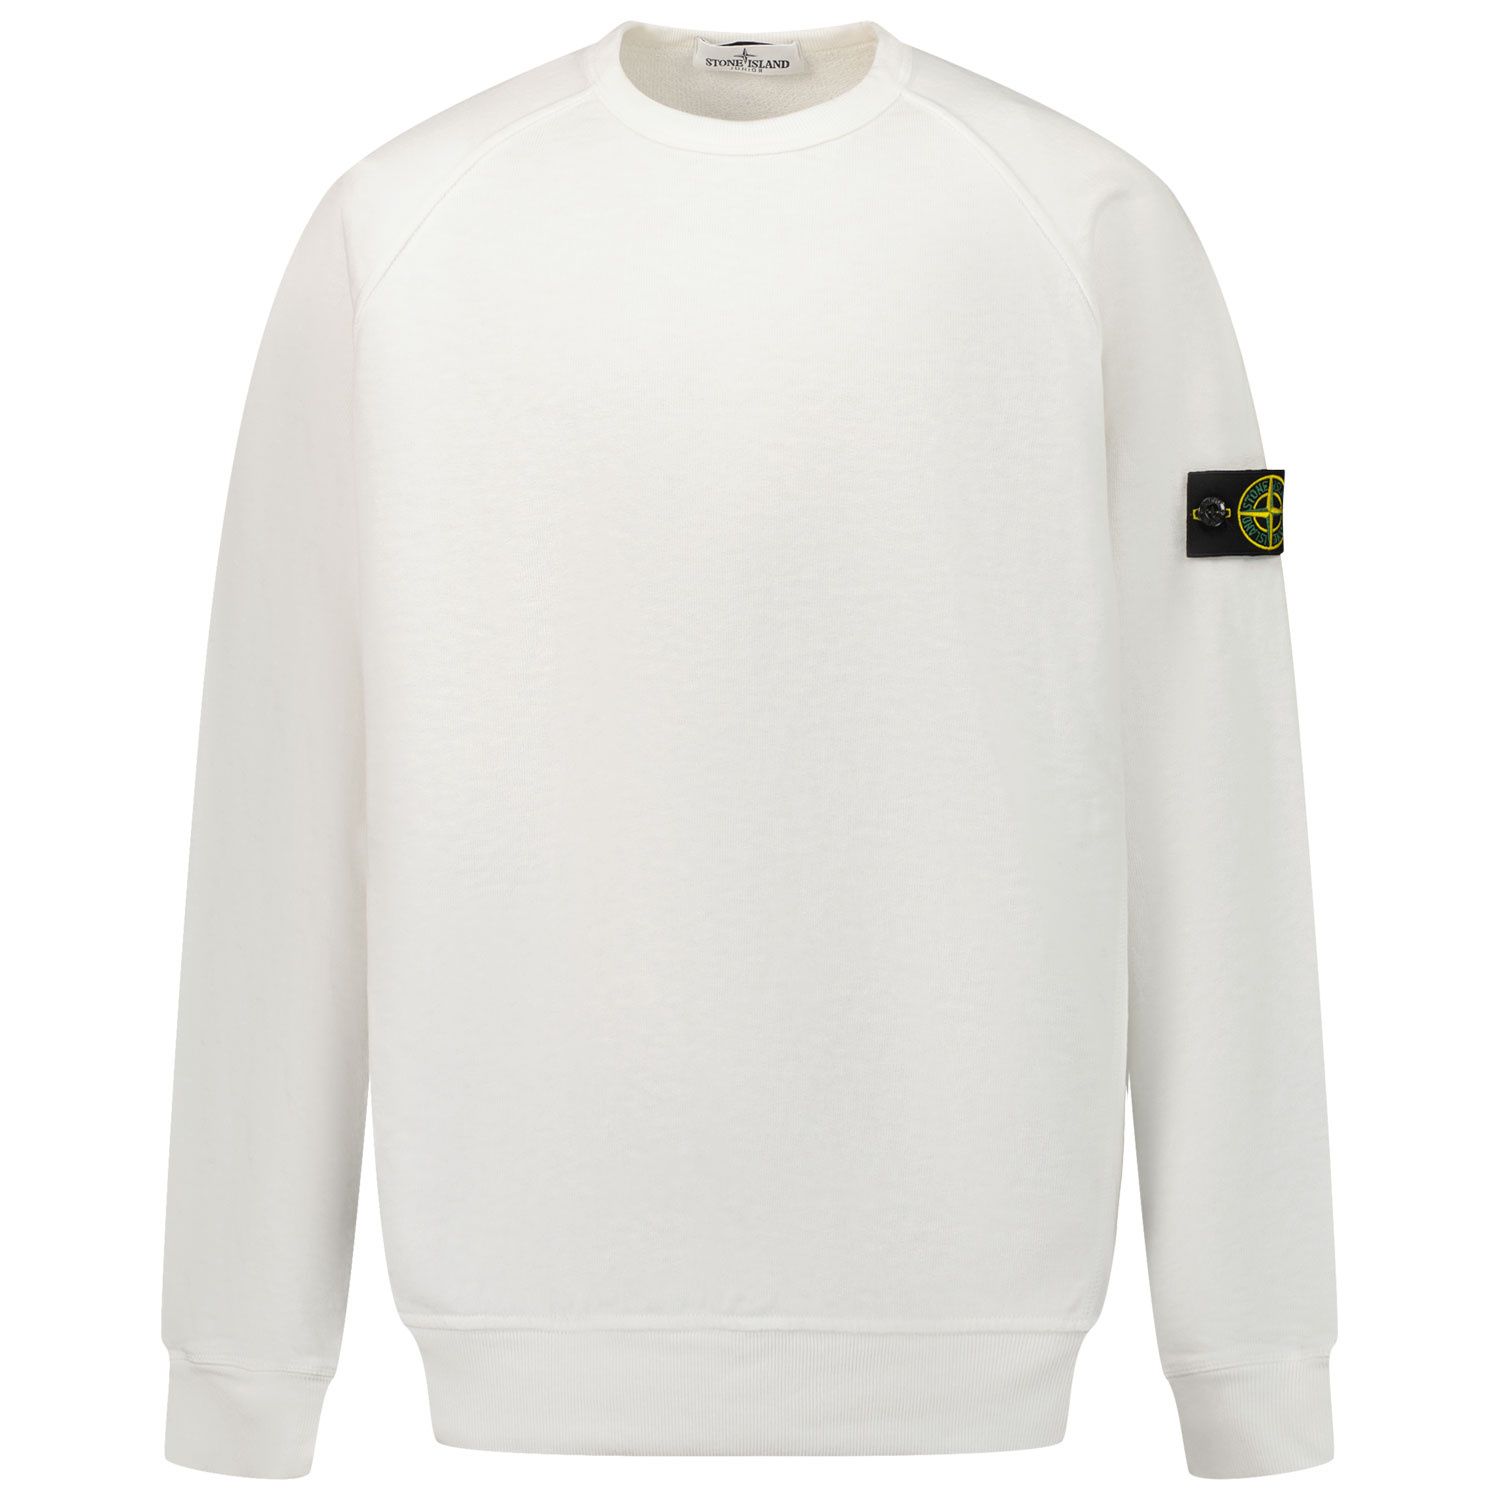 Picture of Stone Island 761660641 kids sweater white